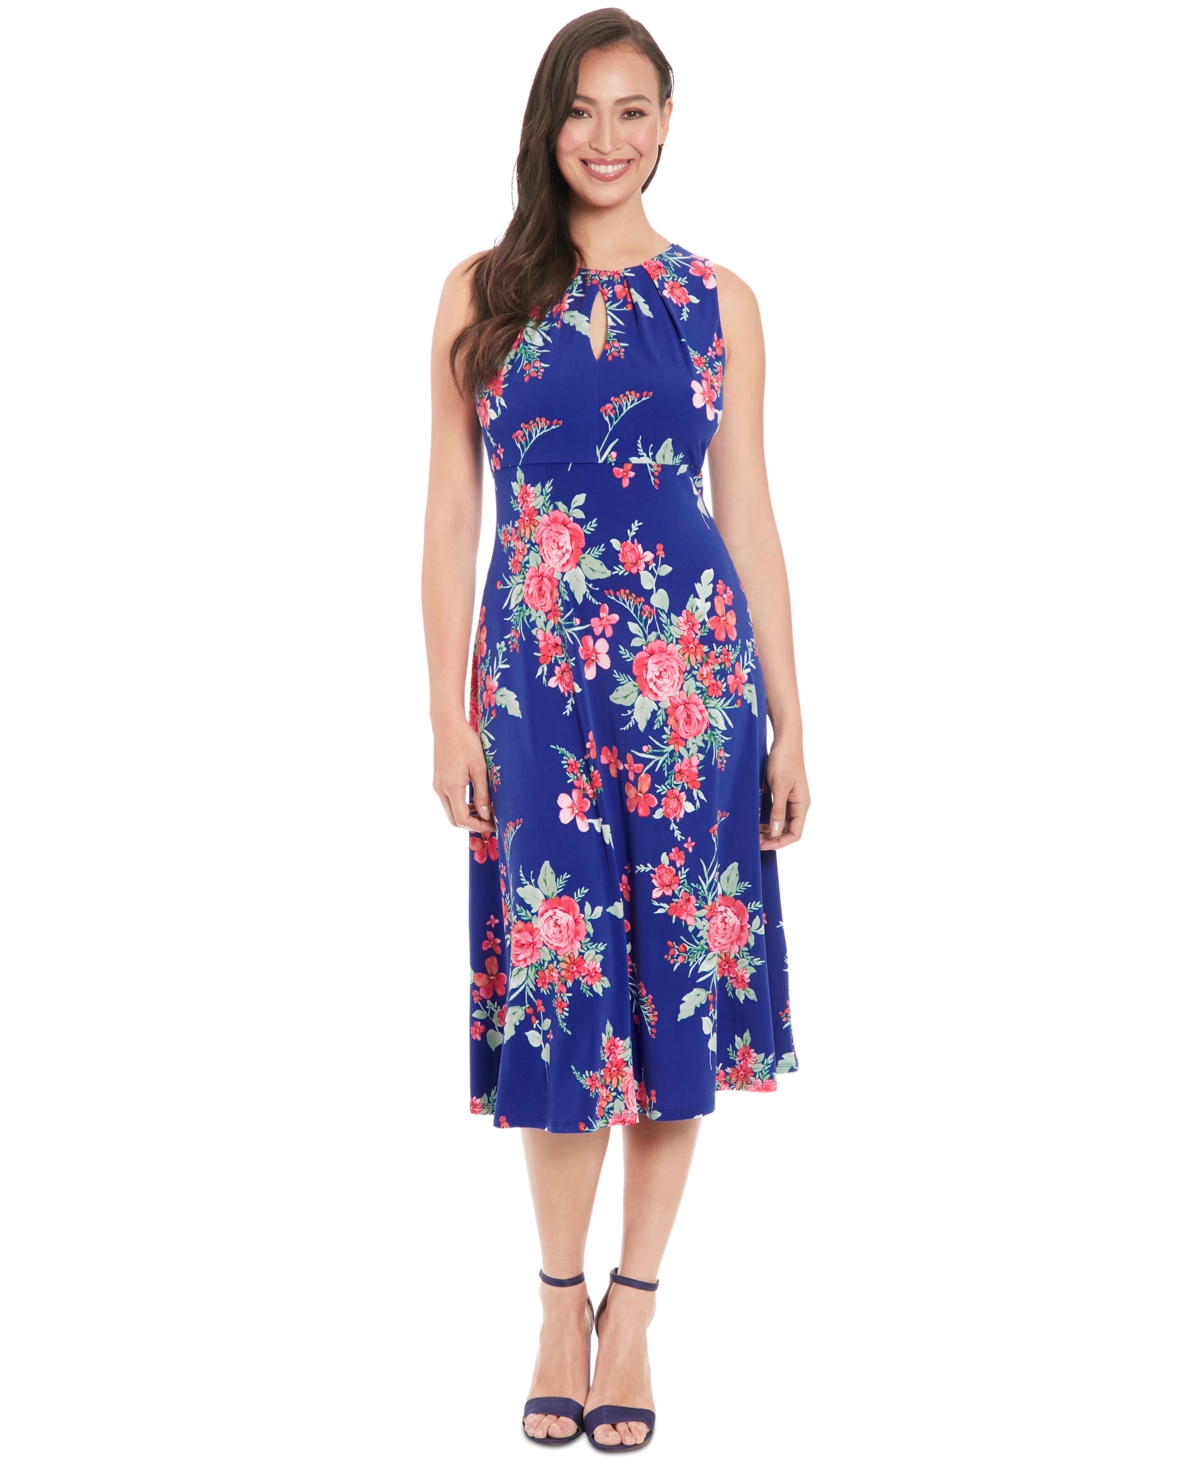 Women's Floral-Print Fit & Flare Dress - Navy Pink